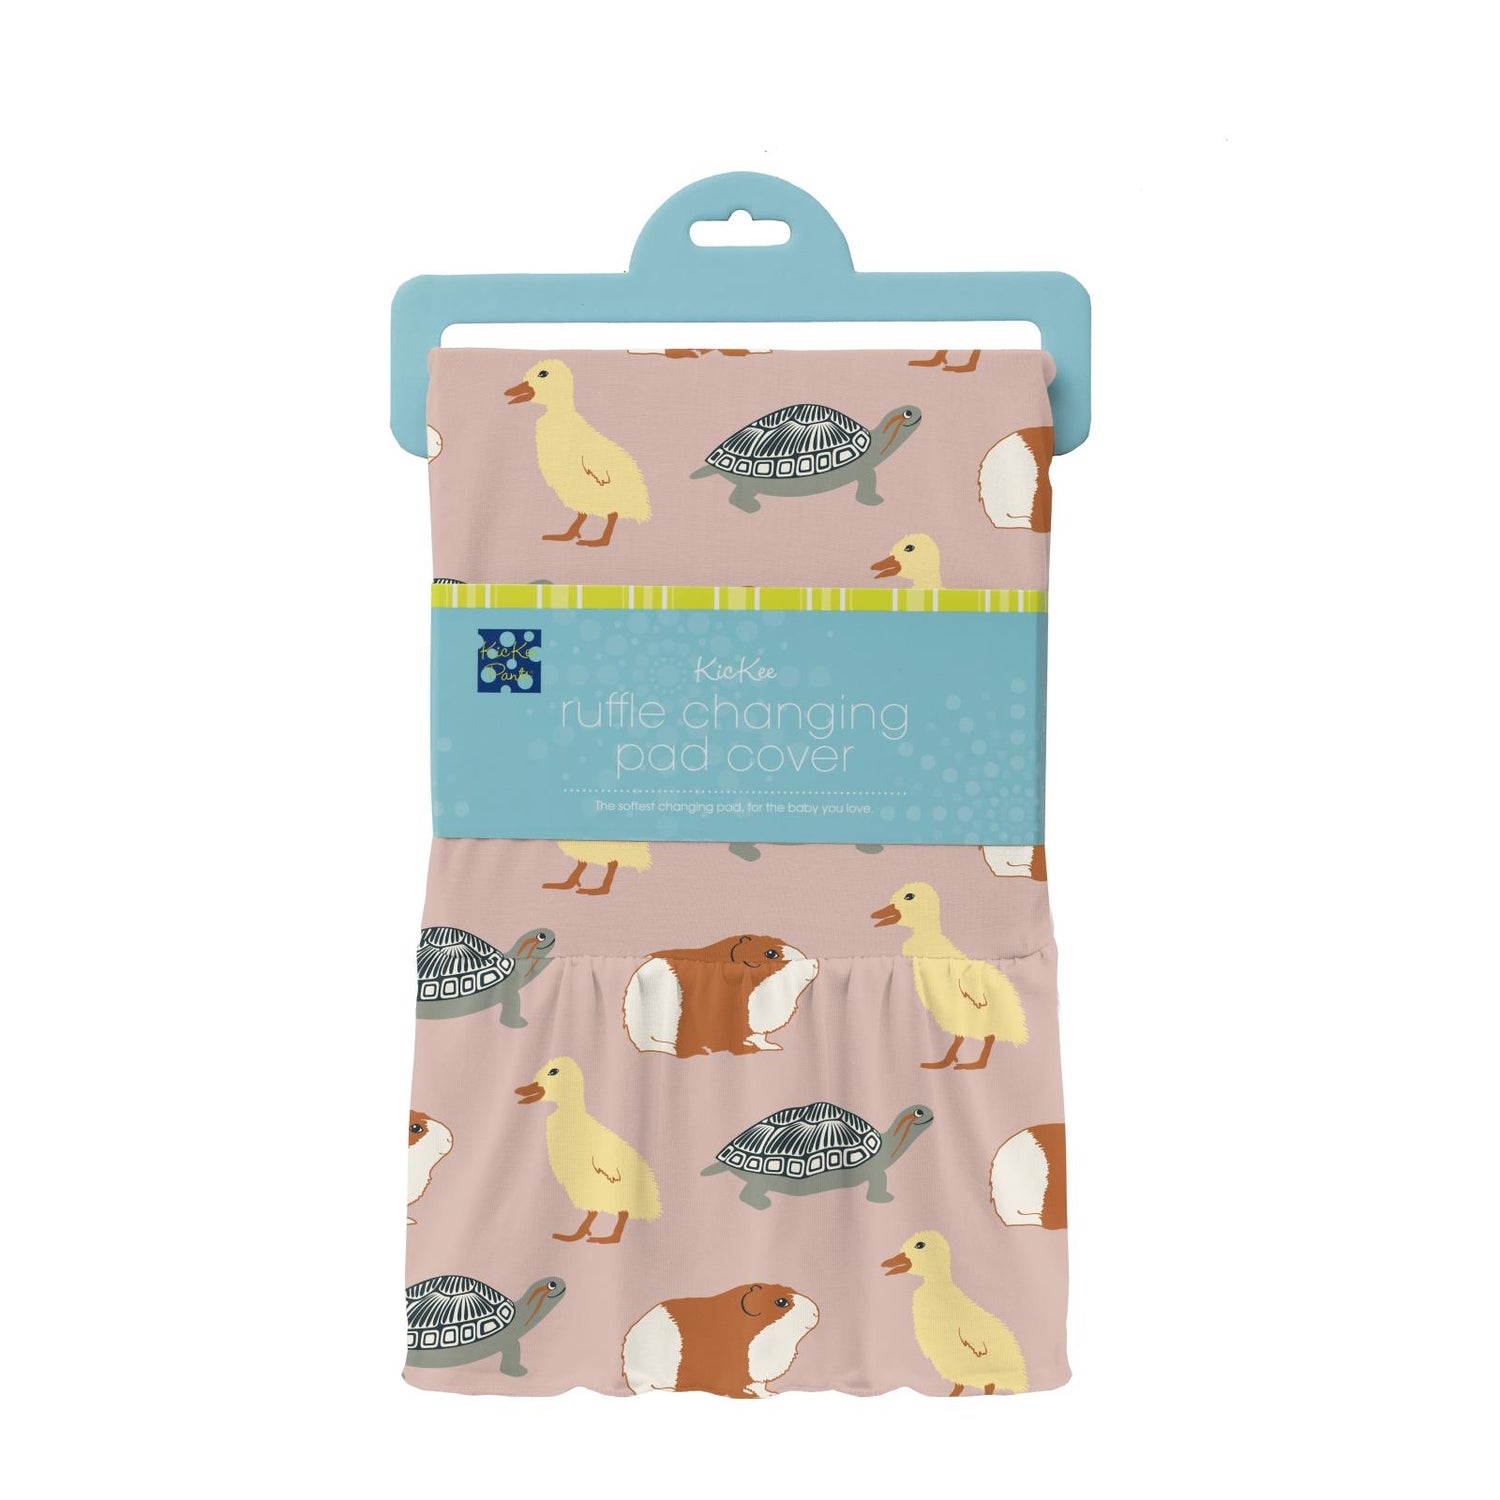 Print Ruffle Changing Pad Cover in Peach Blossom Class Pets